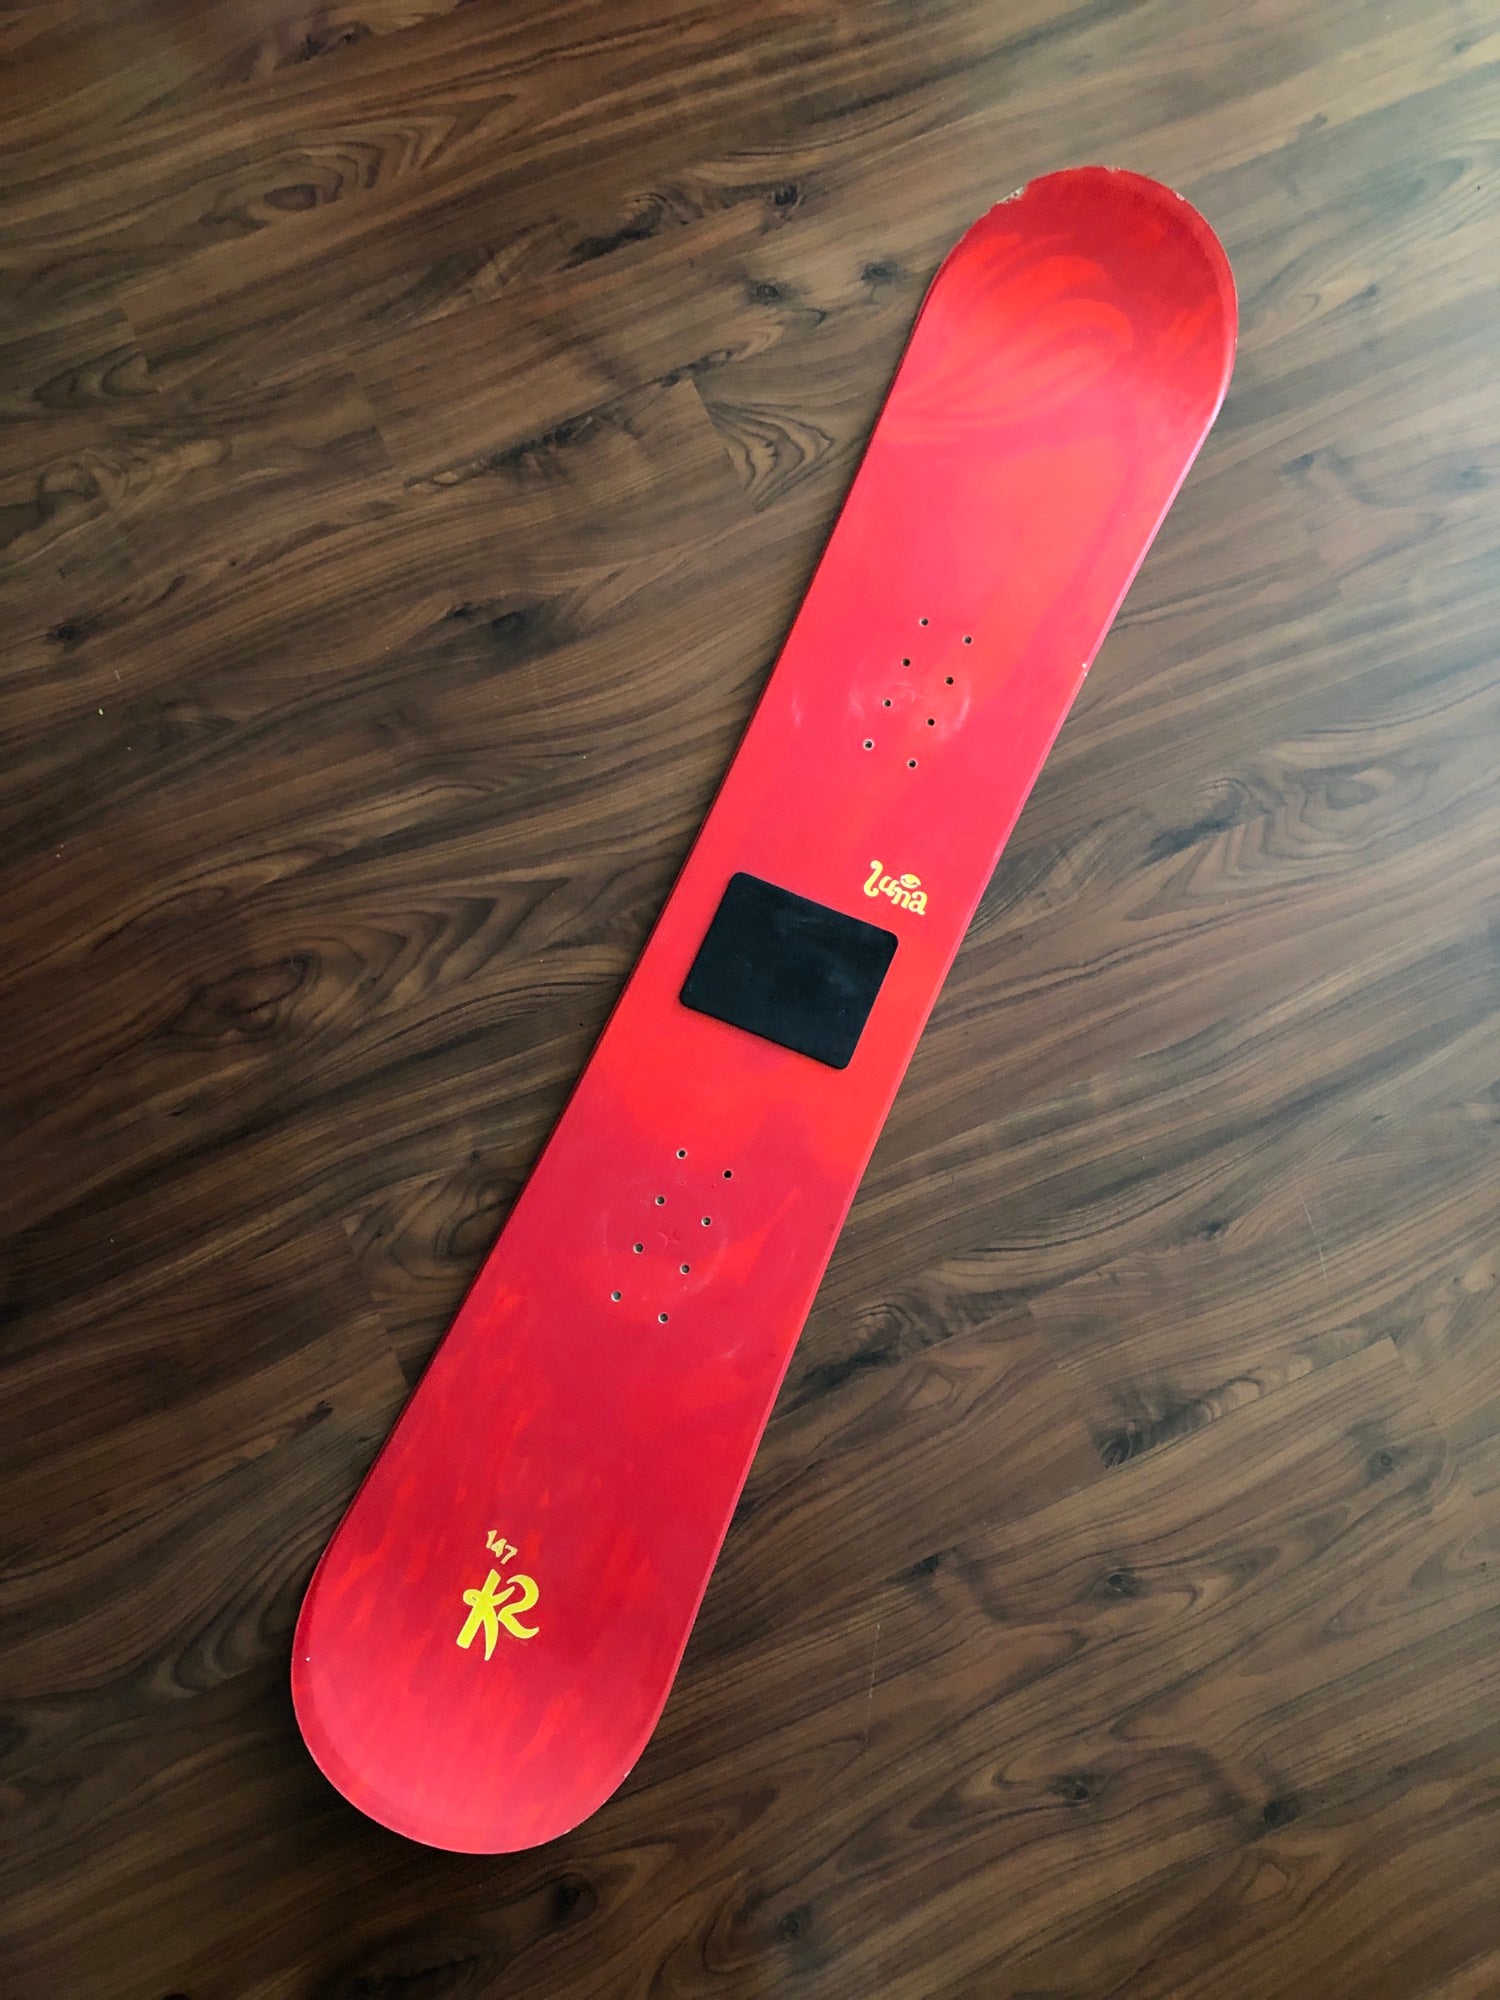 K2 Snowboards | Used and New on SidelineSwap